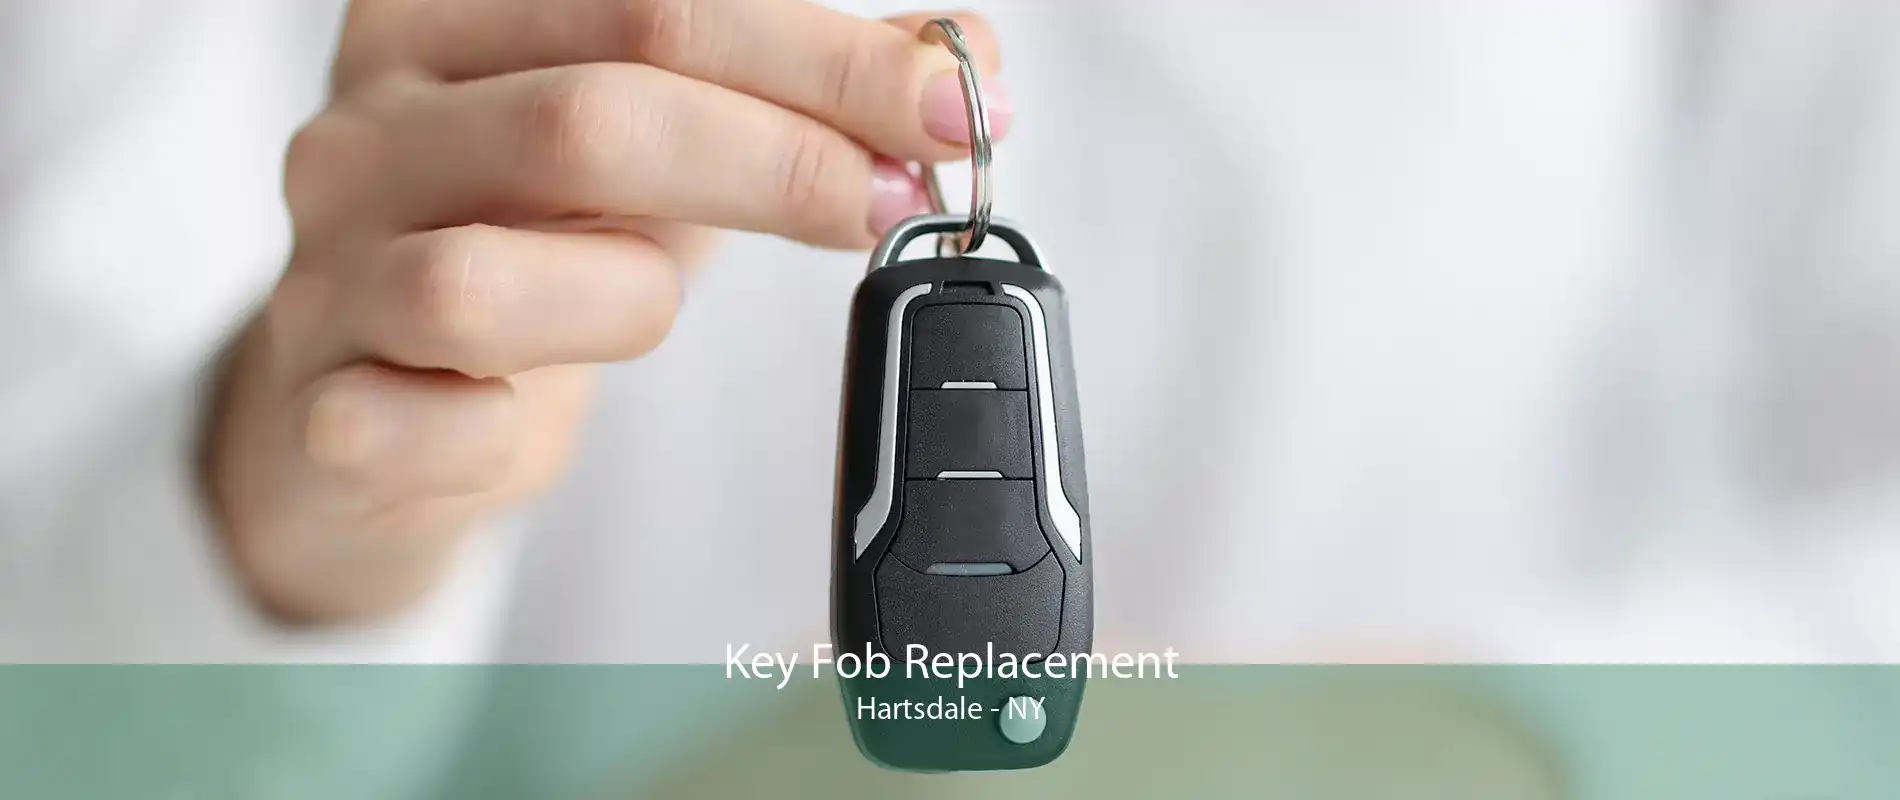 Key Fob Replacement Hartsdale - NY